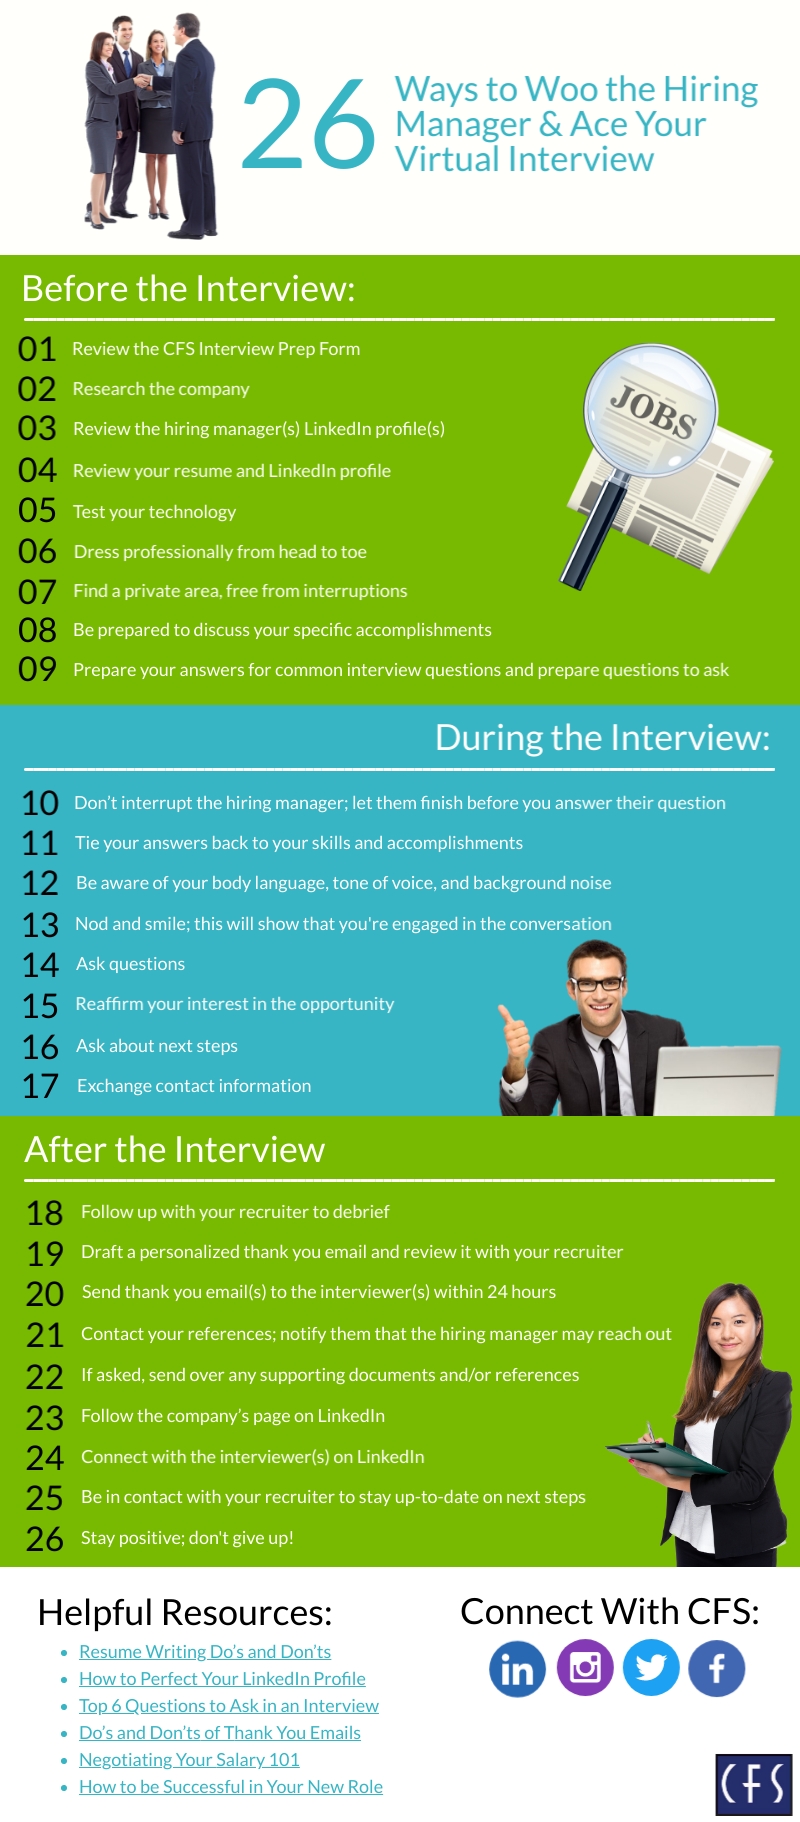 26 Ways to Woo the Hiring Manager